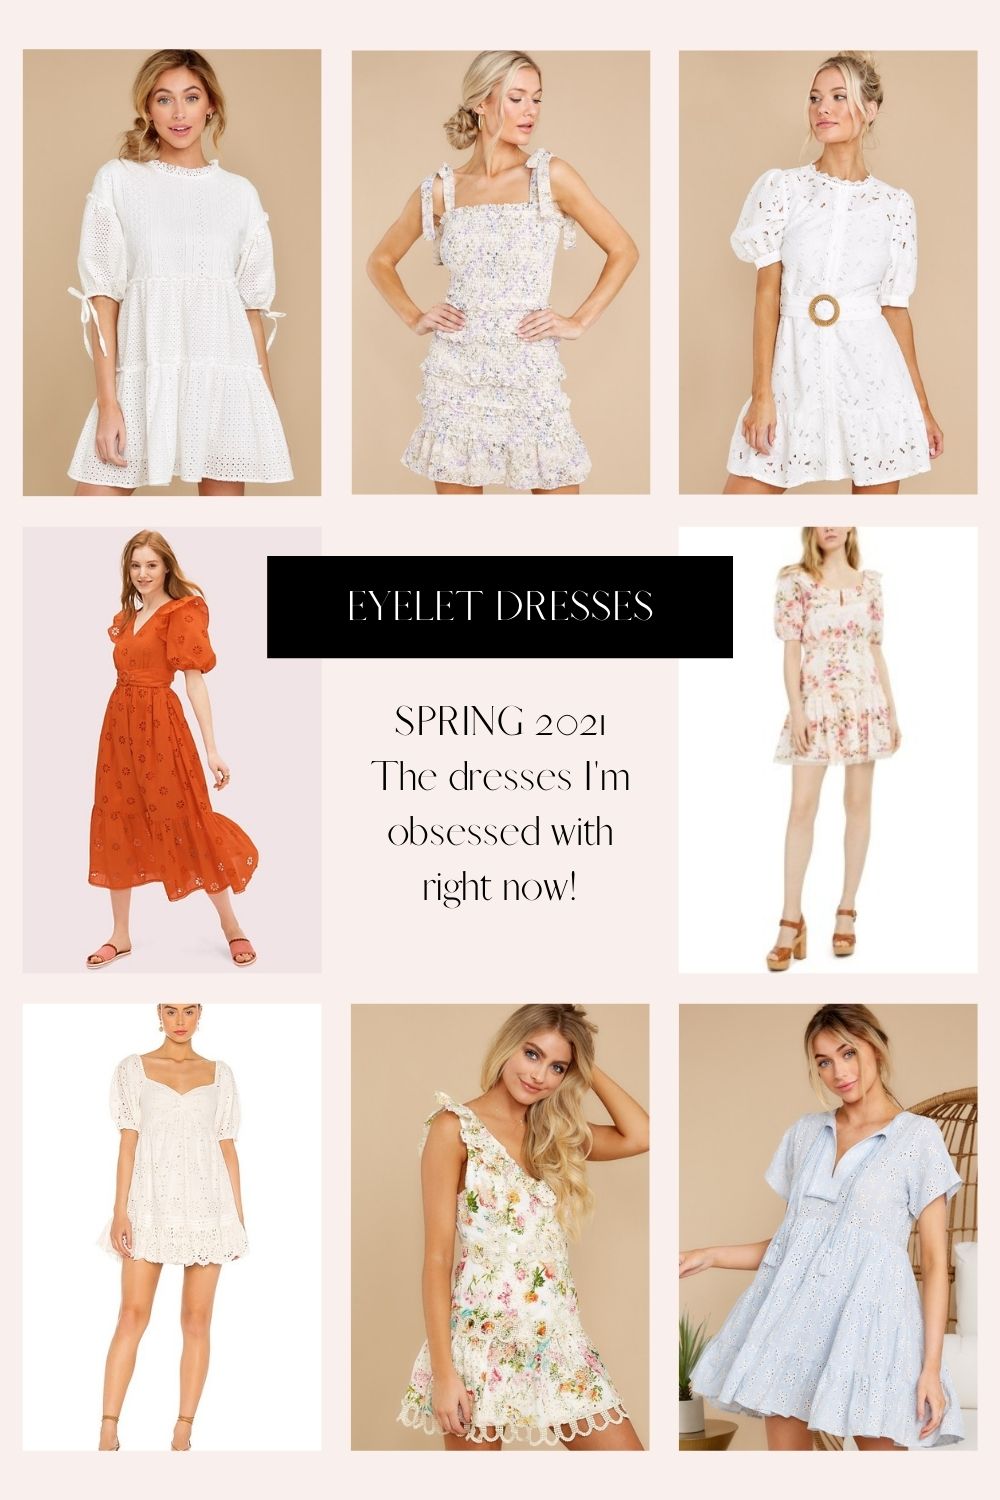 8 Cute and affordable eyelet dresses for Spring - LUCIANA COUTO